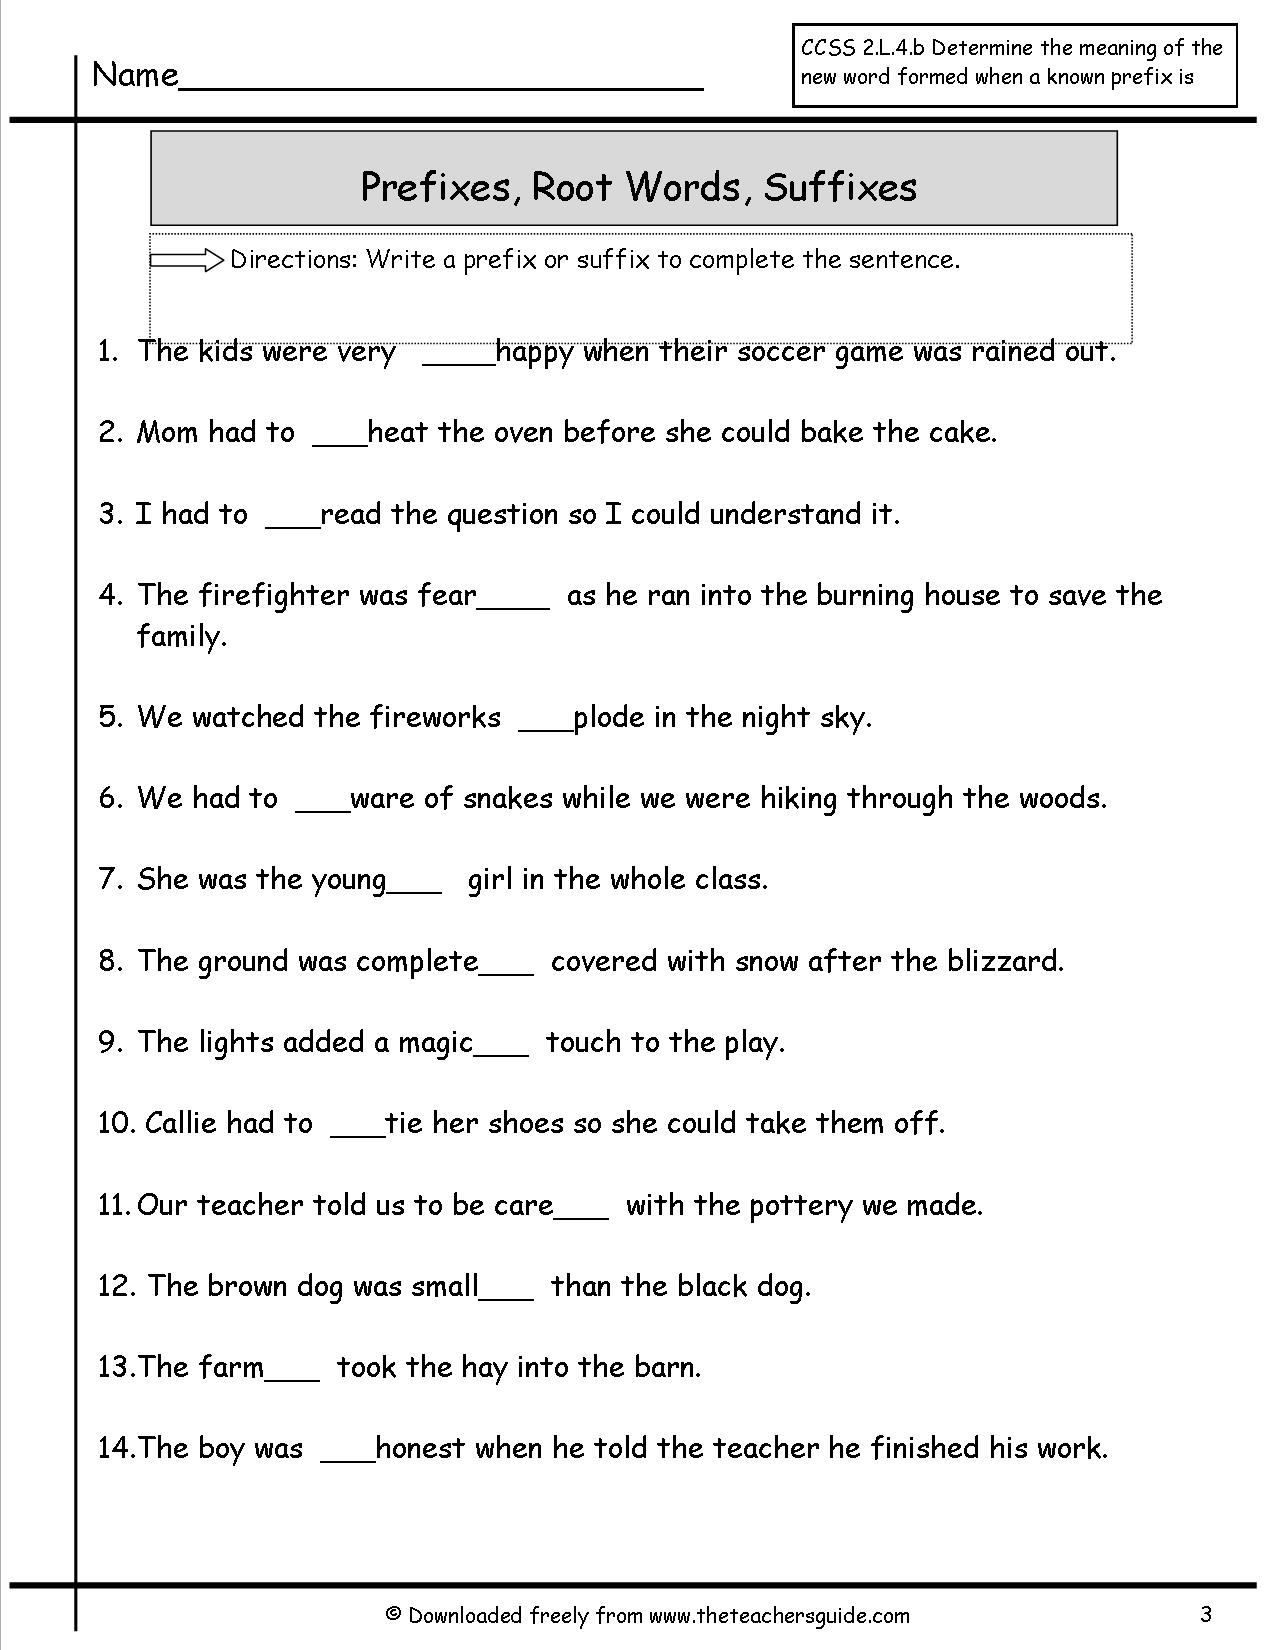 Free Printable Worksheets On Prefixes Suffixes And Root Words